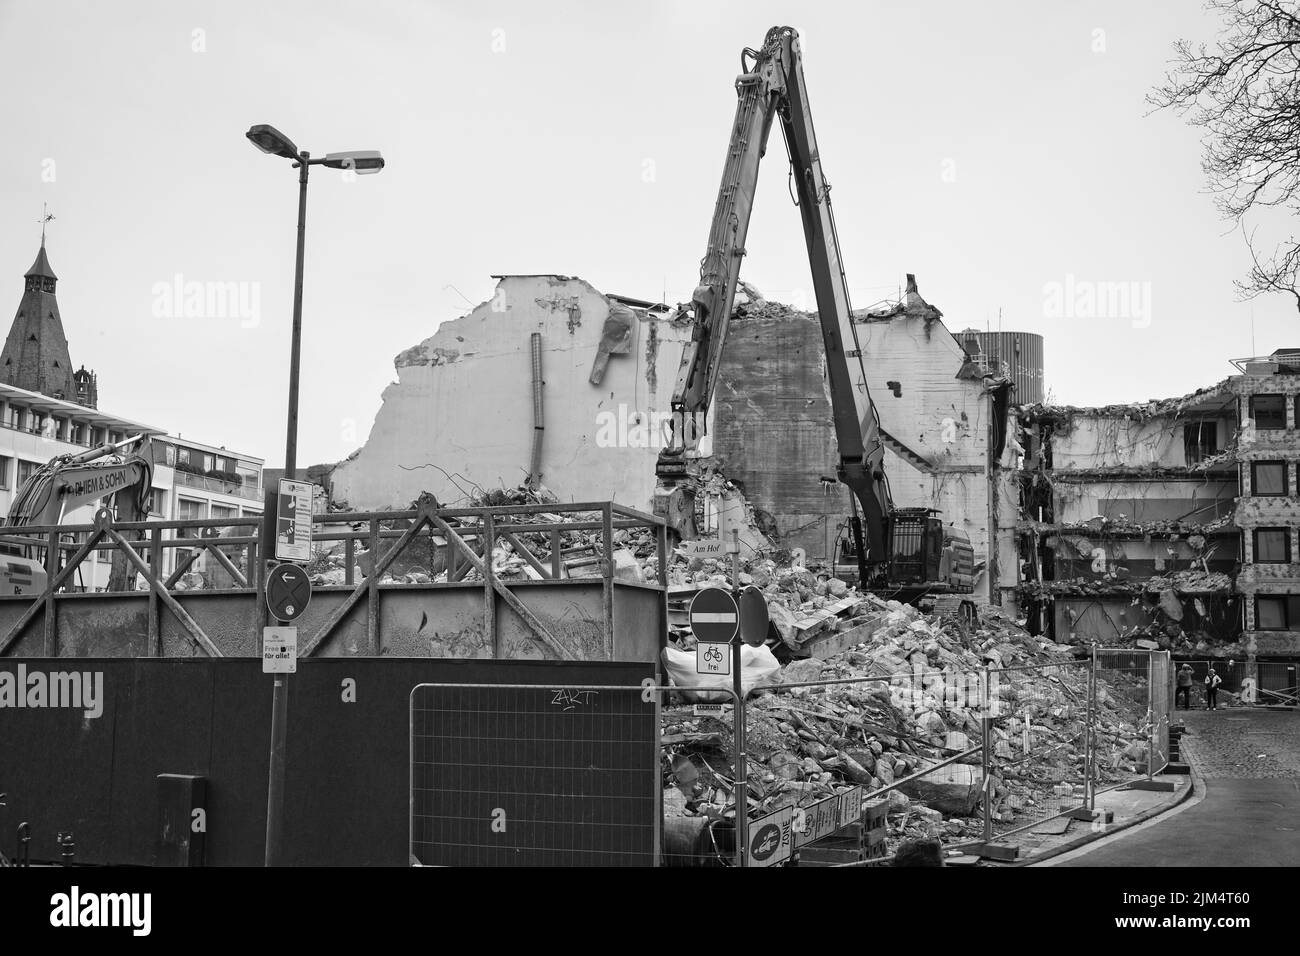 Demolition work in Cologne city center near the Cologne Cathedral, black and white phpto Stock Photo